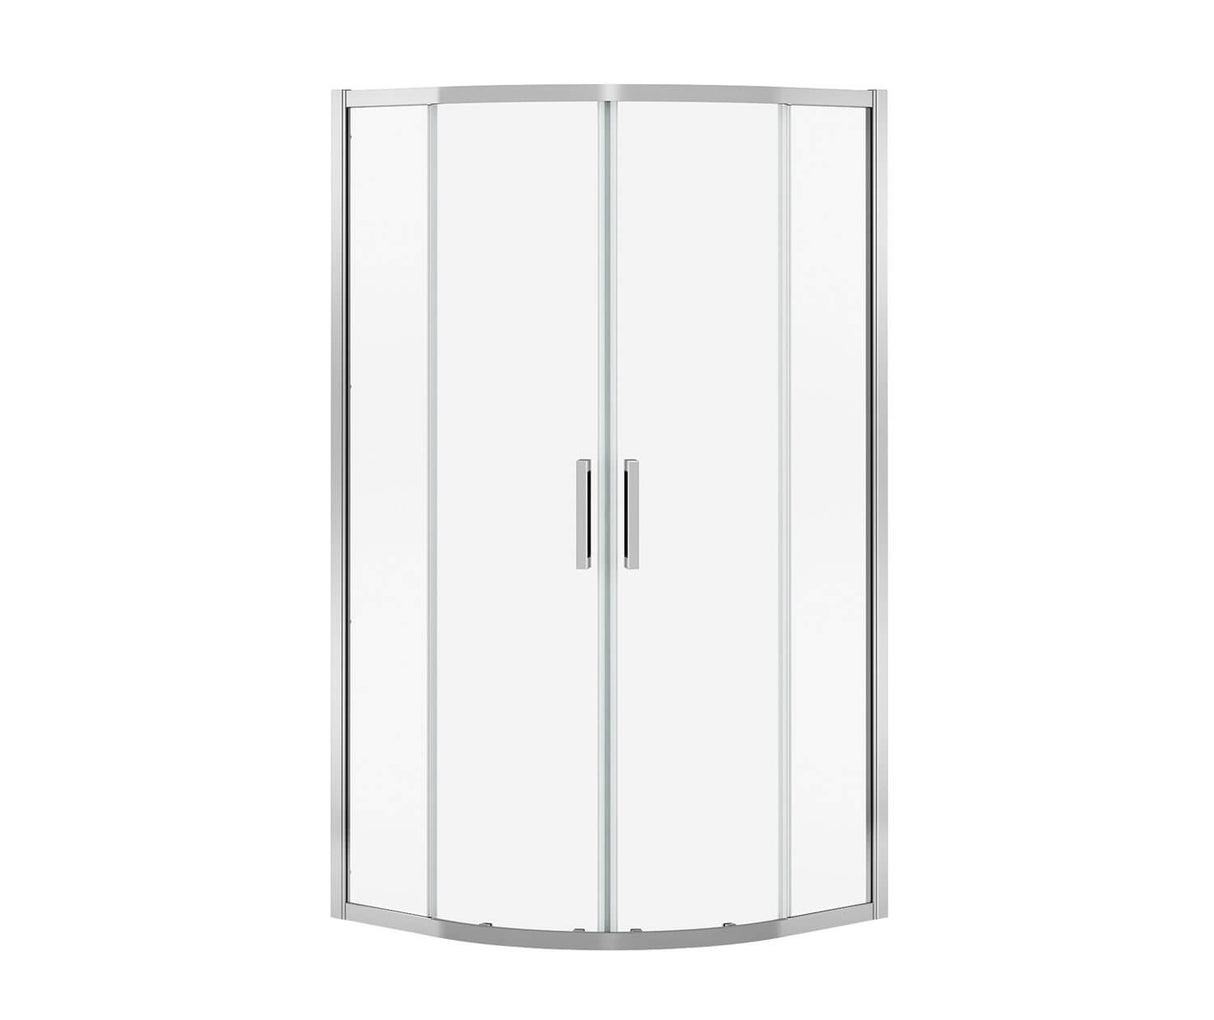 MAAX 137445-900-084-000 Radia Neo-round 40 x 40 x 71 ½ in. 6mm Sliding Shower Door for Corner Installation with Clear glass in Chrome